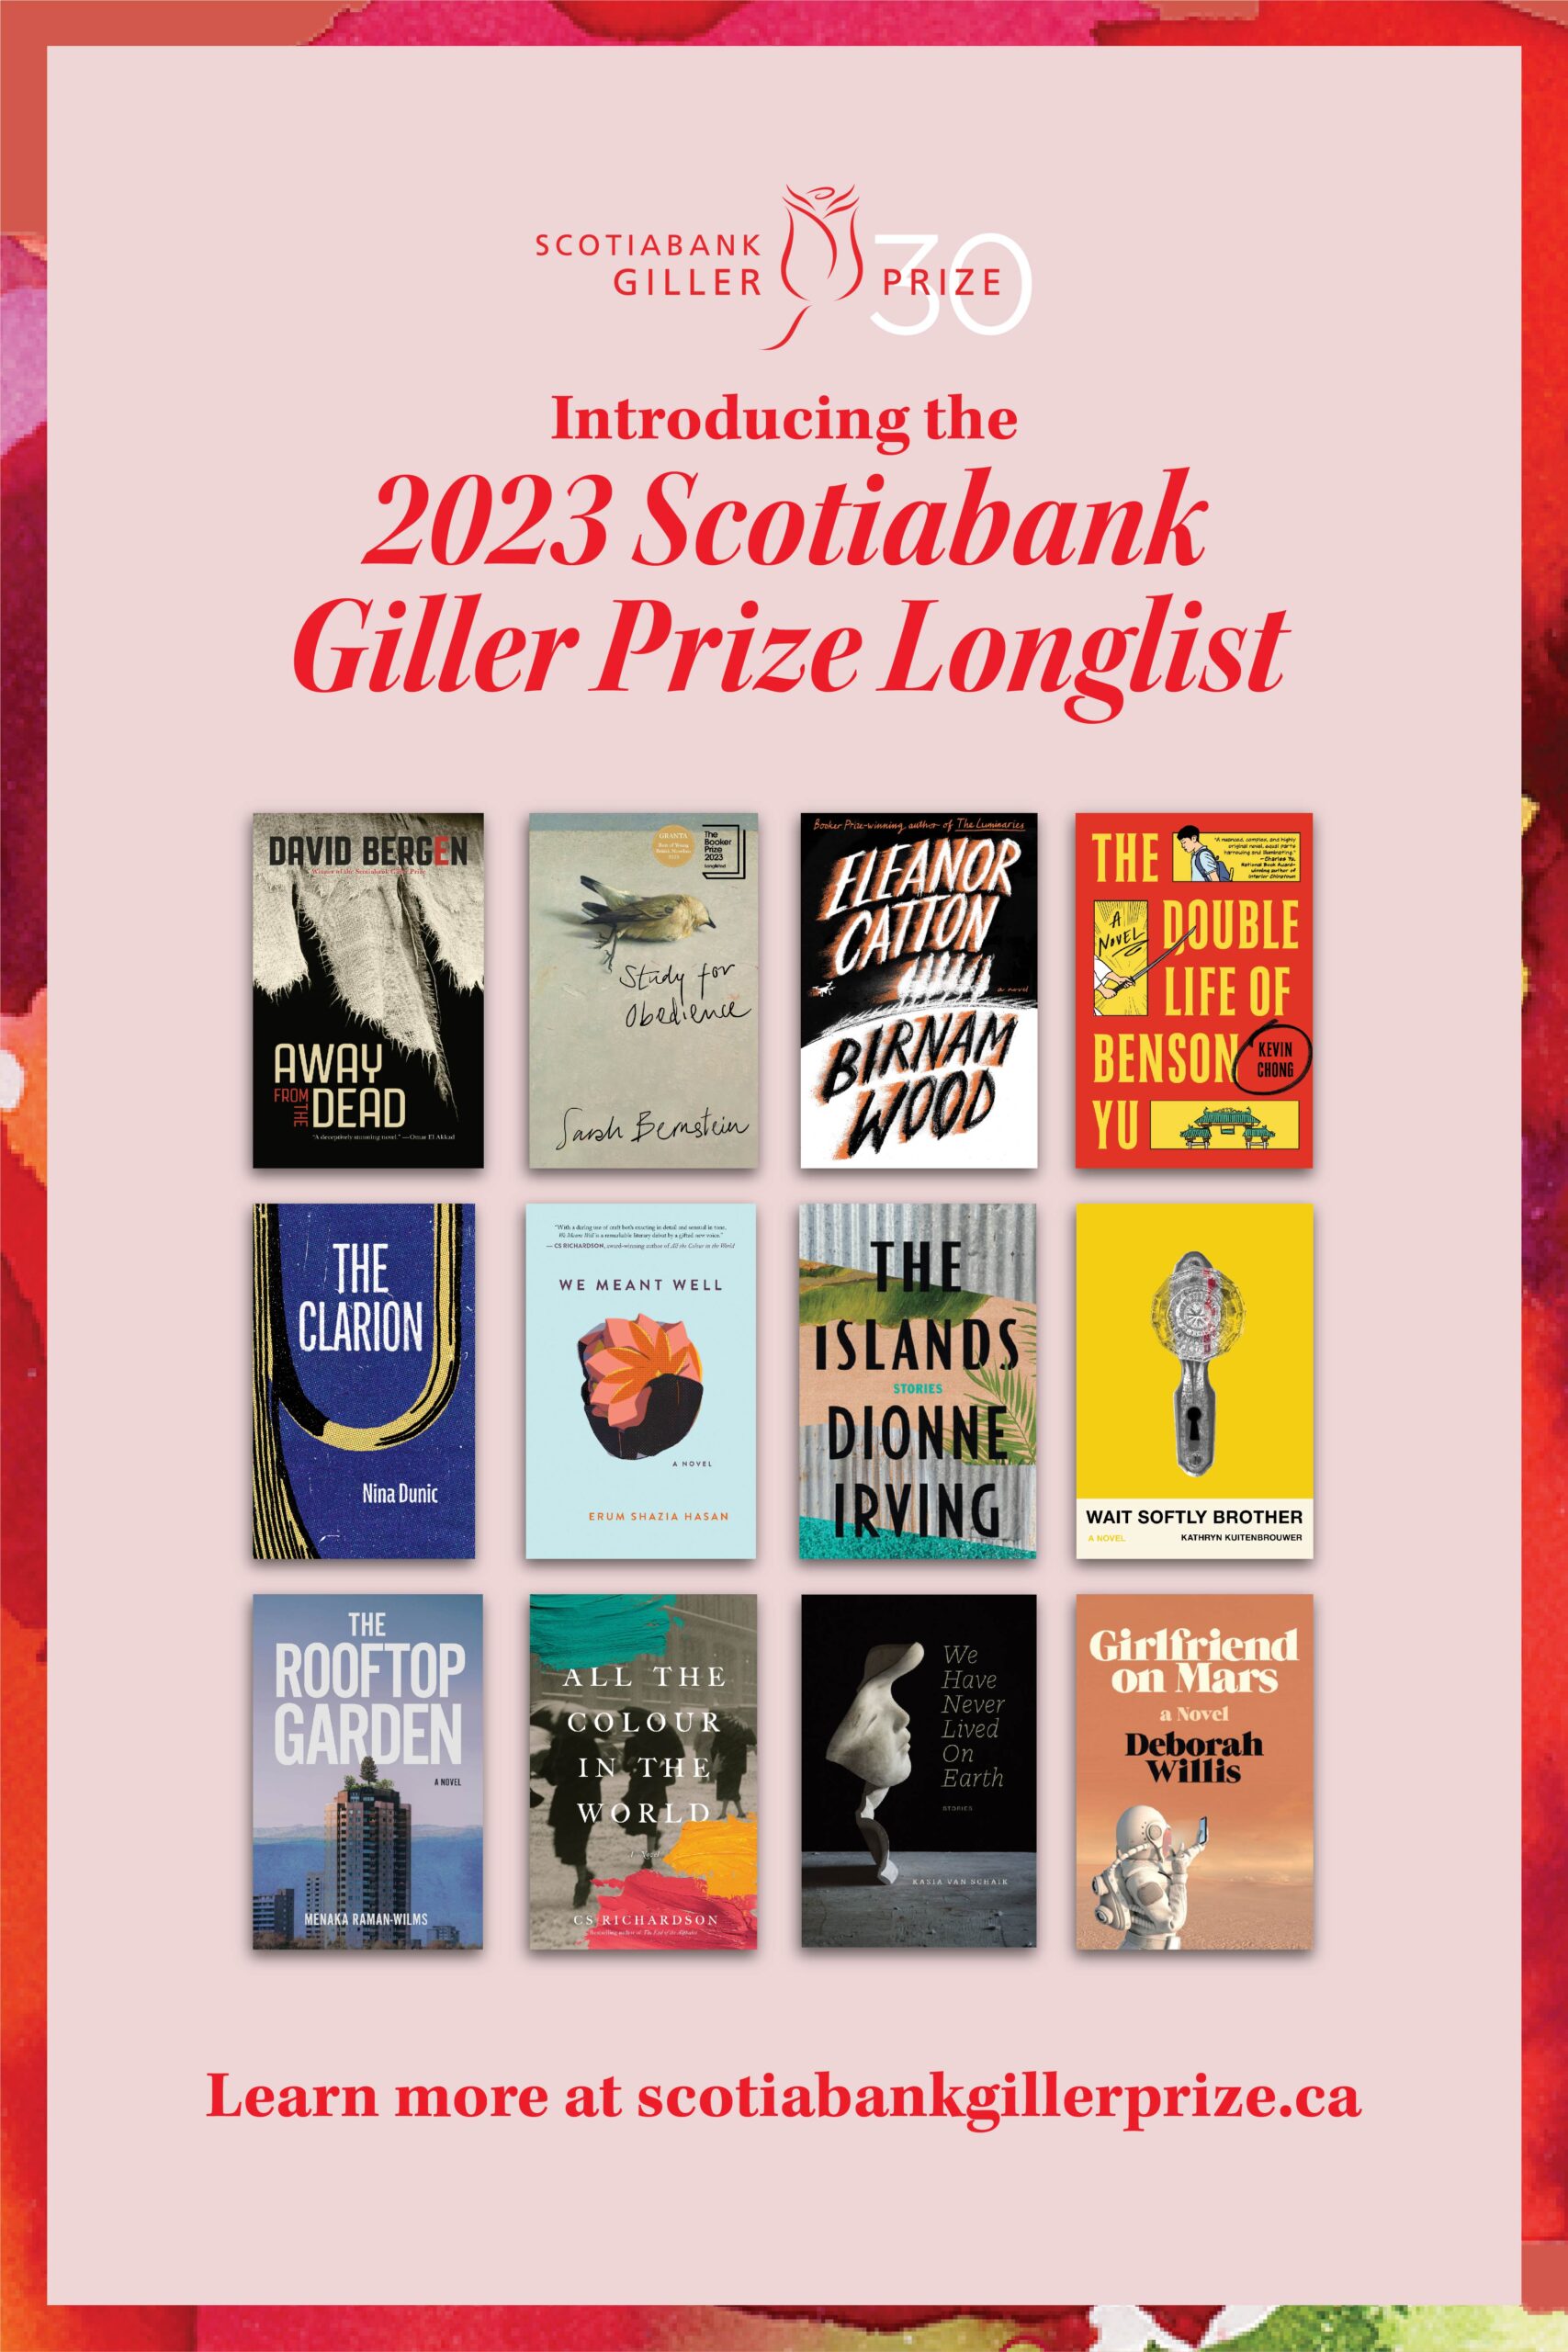 2023 Scotiabank Giller Prize Longlist - 24x36 poster